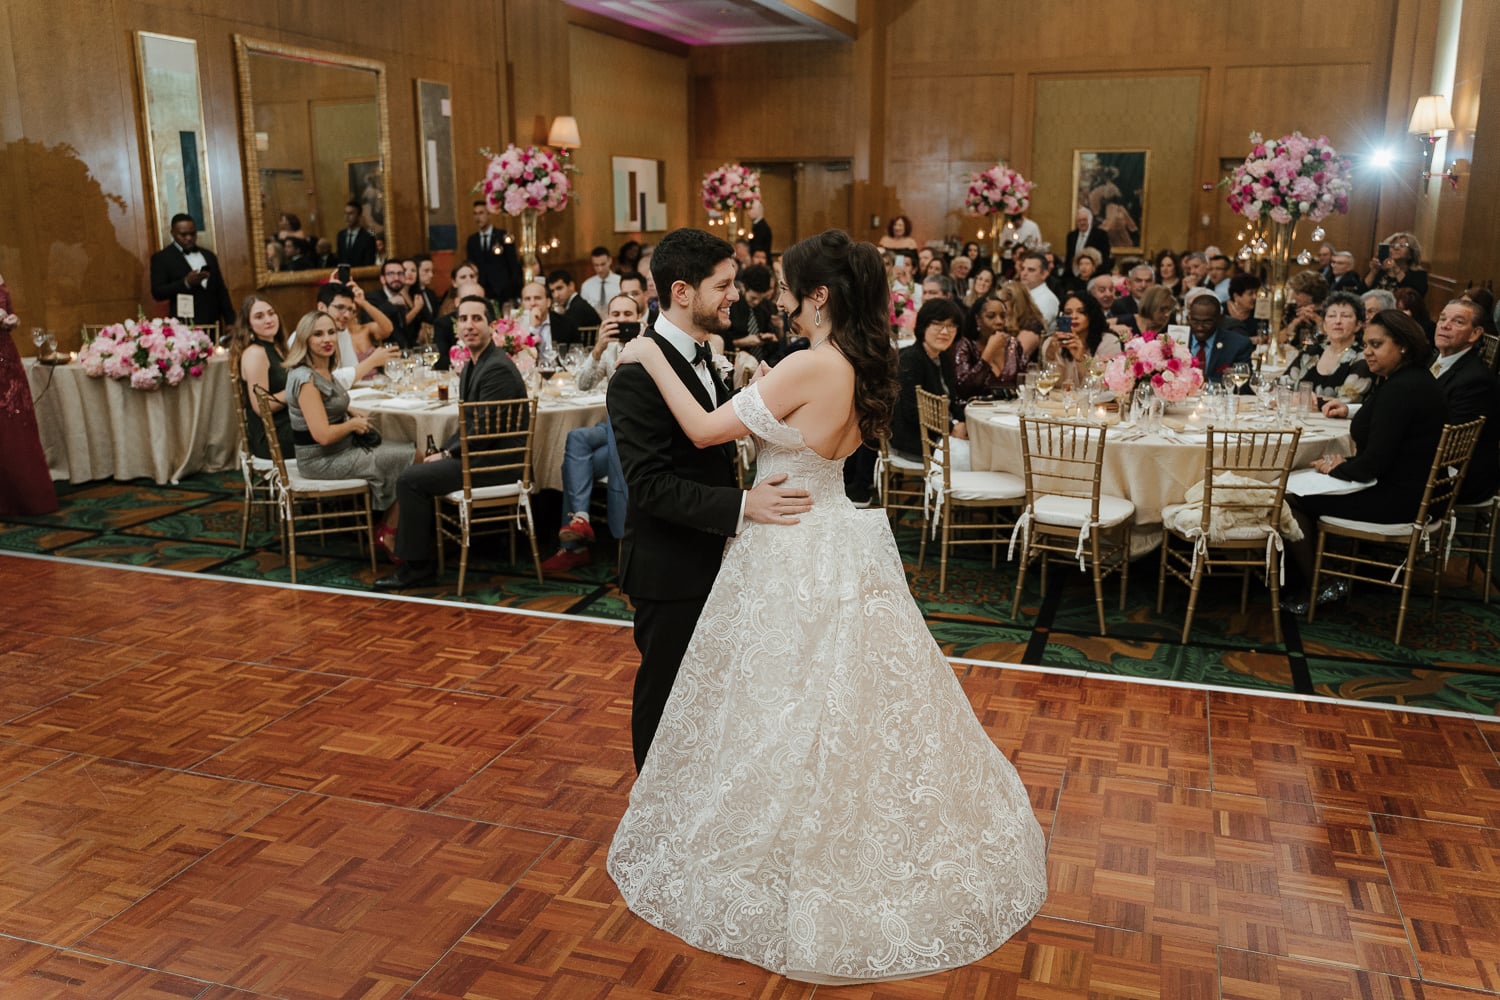 The first dance of the bride and groom